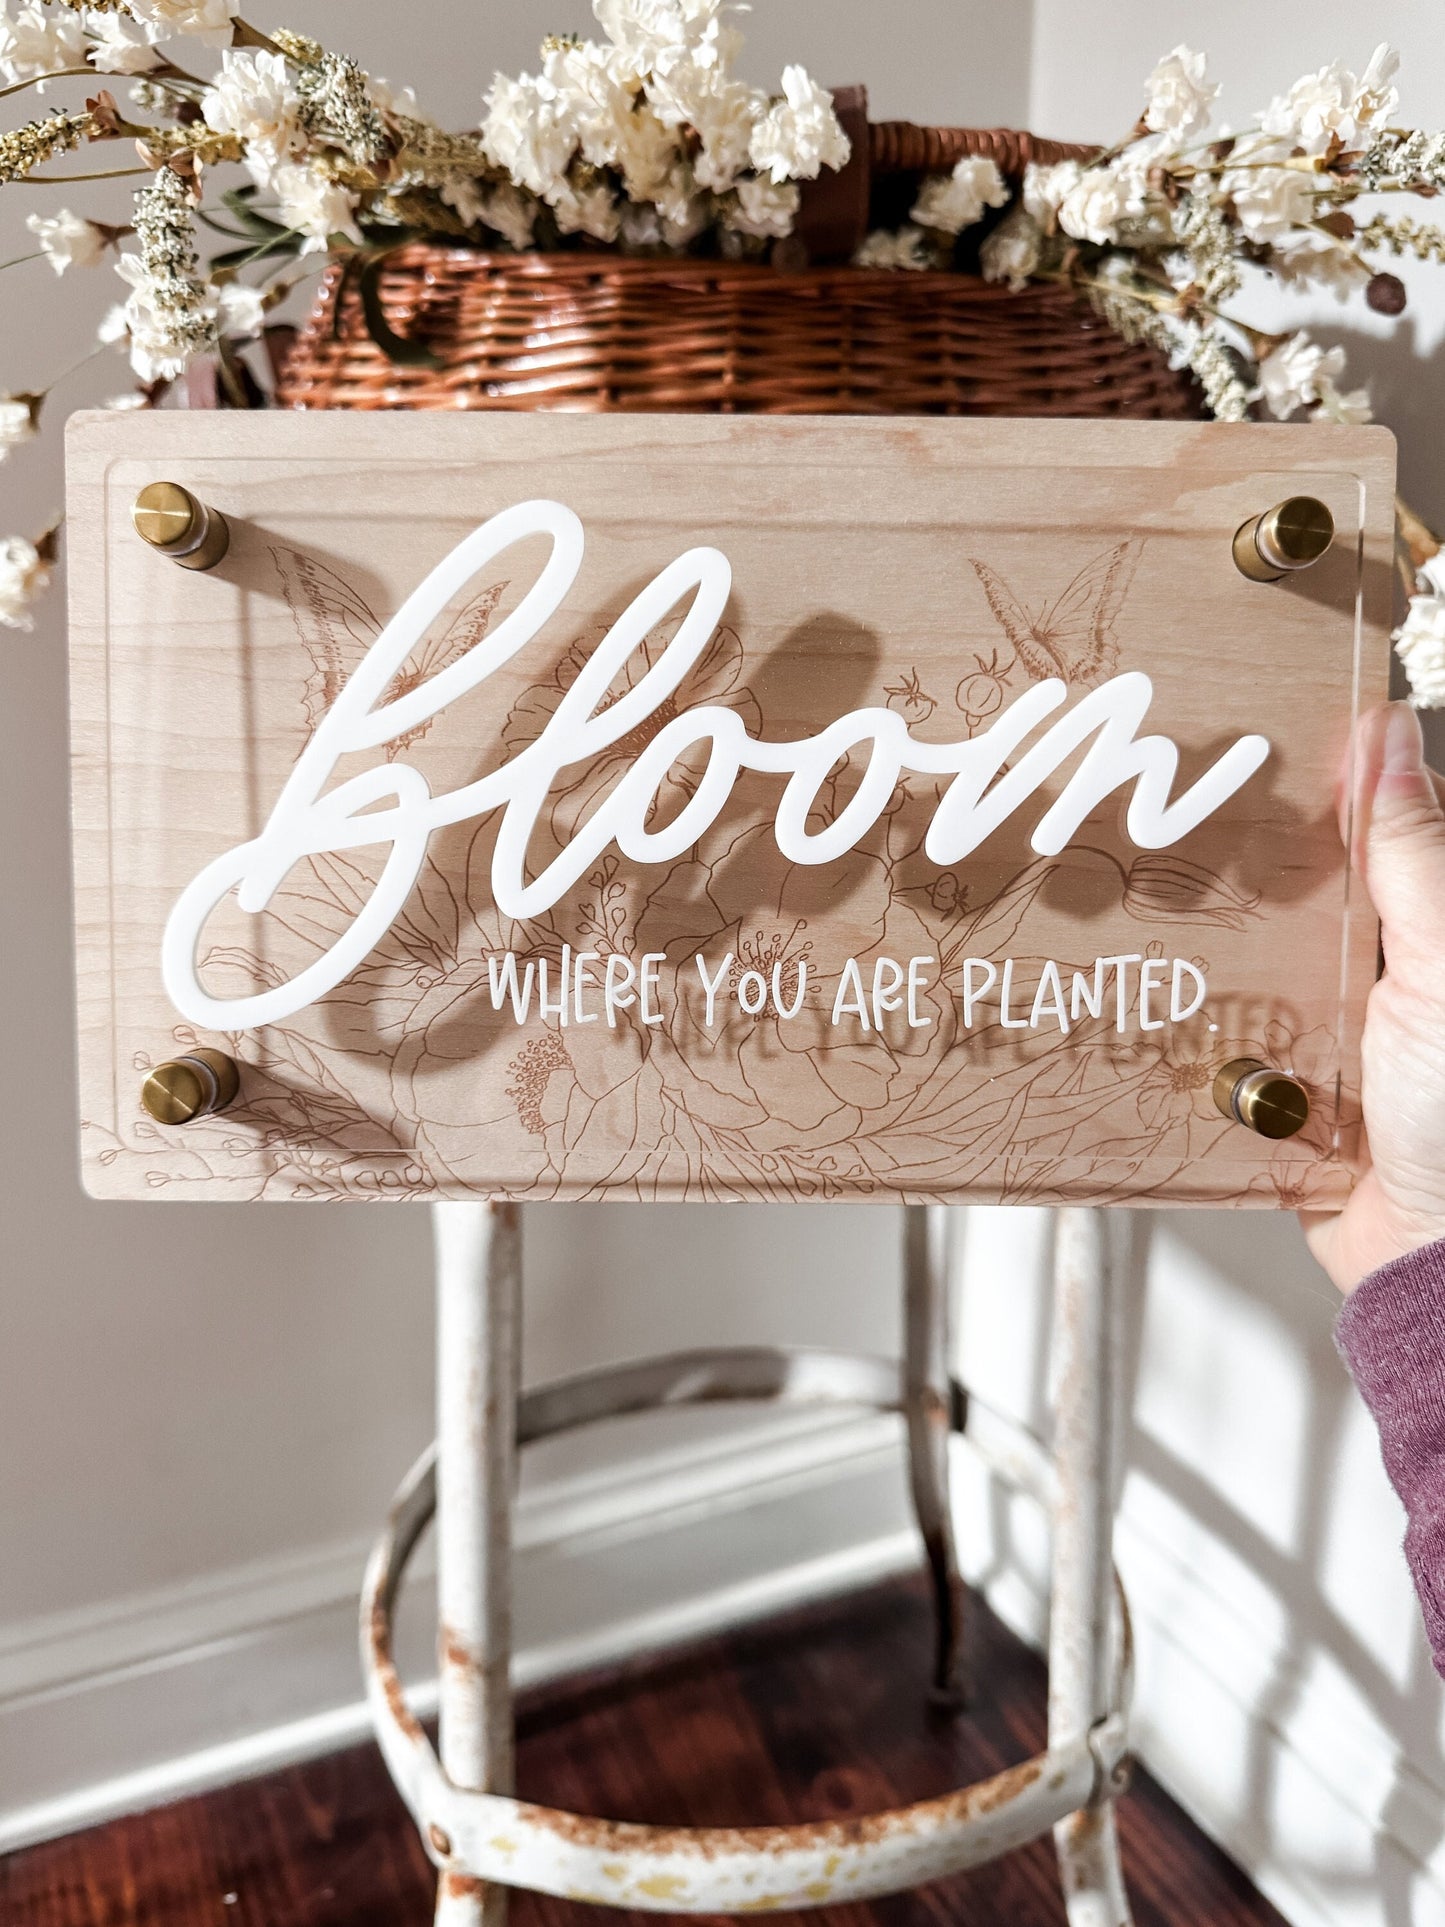 Bloom Where You Are Planted | Positive Wall Art | Boho | Handmade | Boho Shelf Sign | Arched Signs | Stand off sign